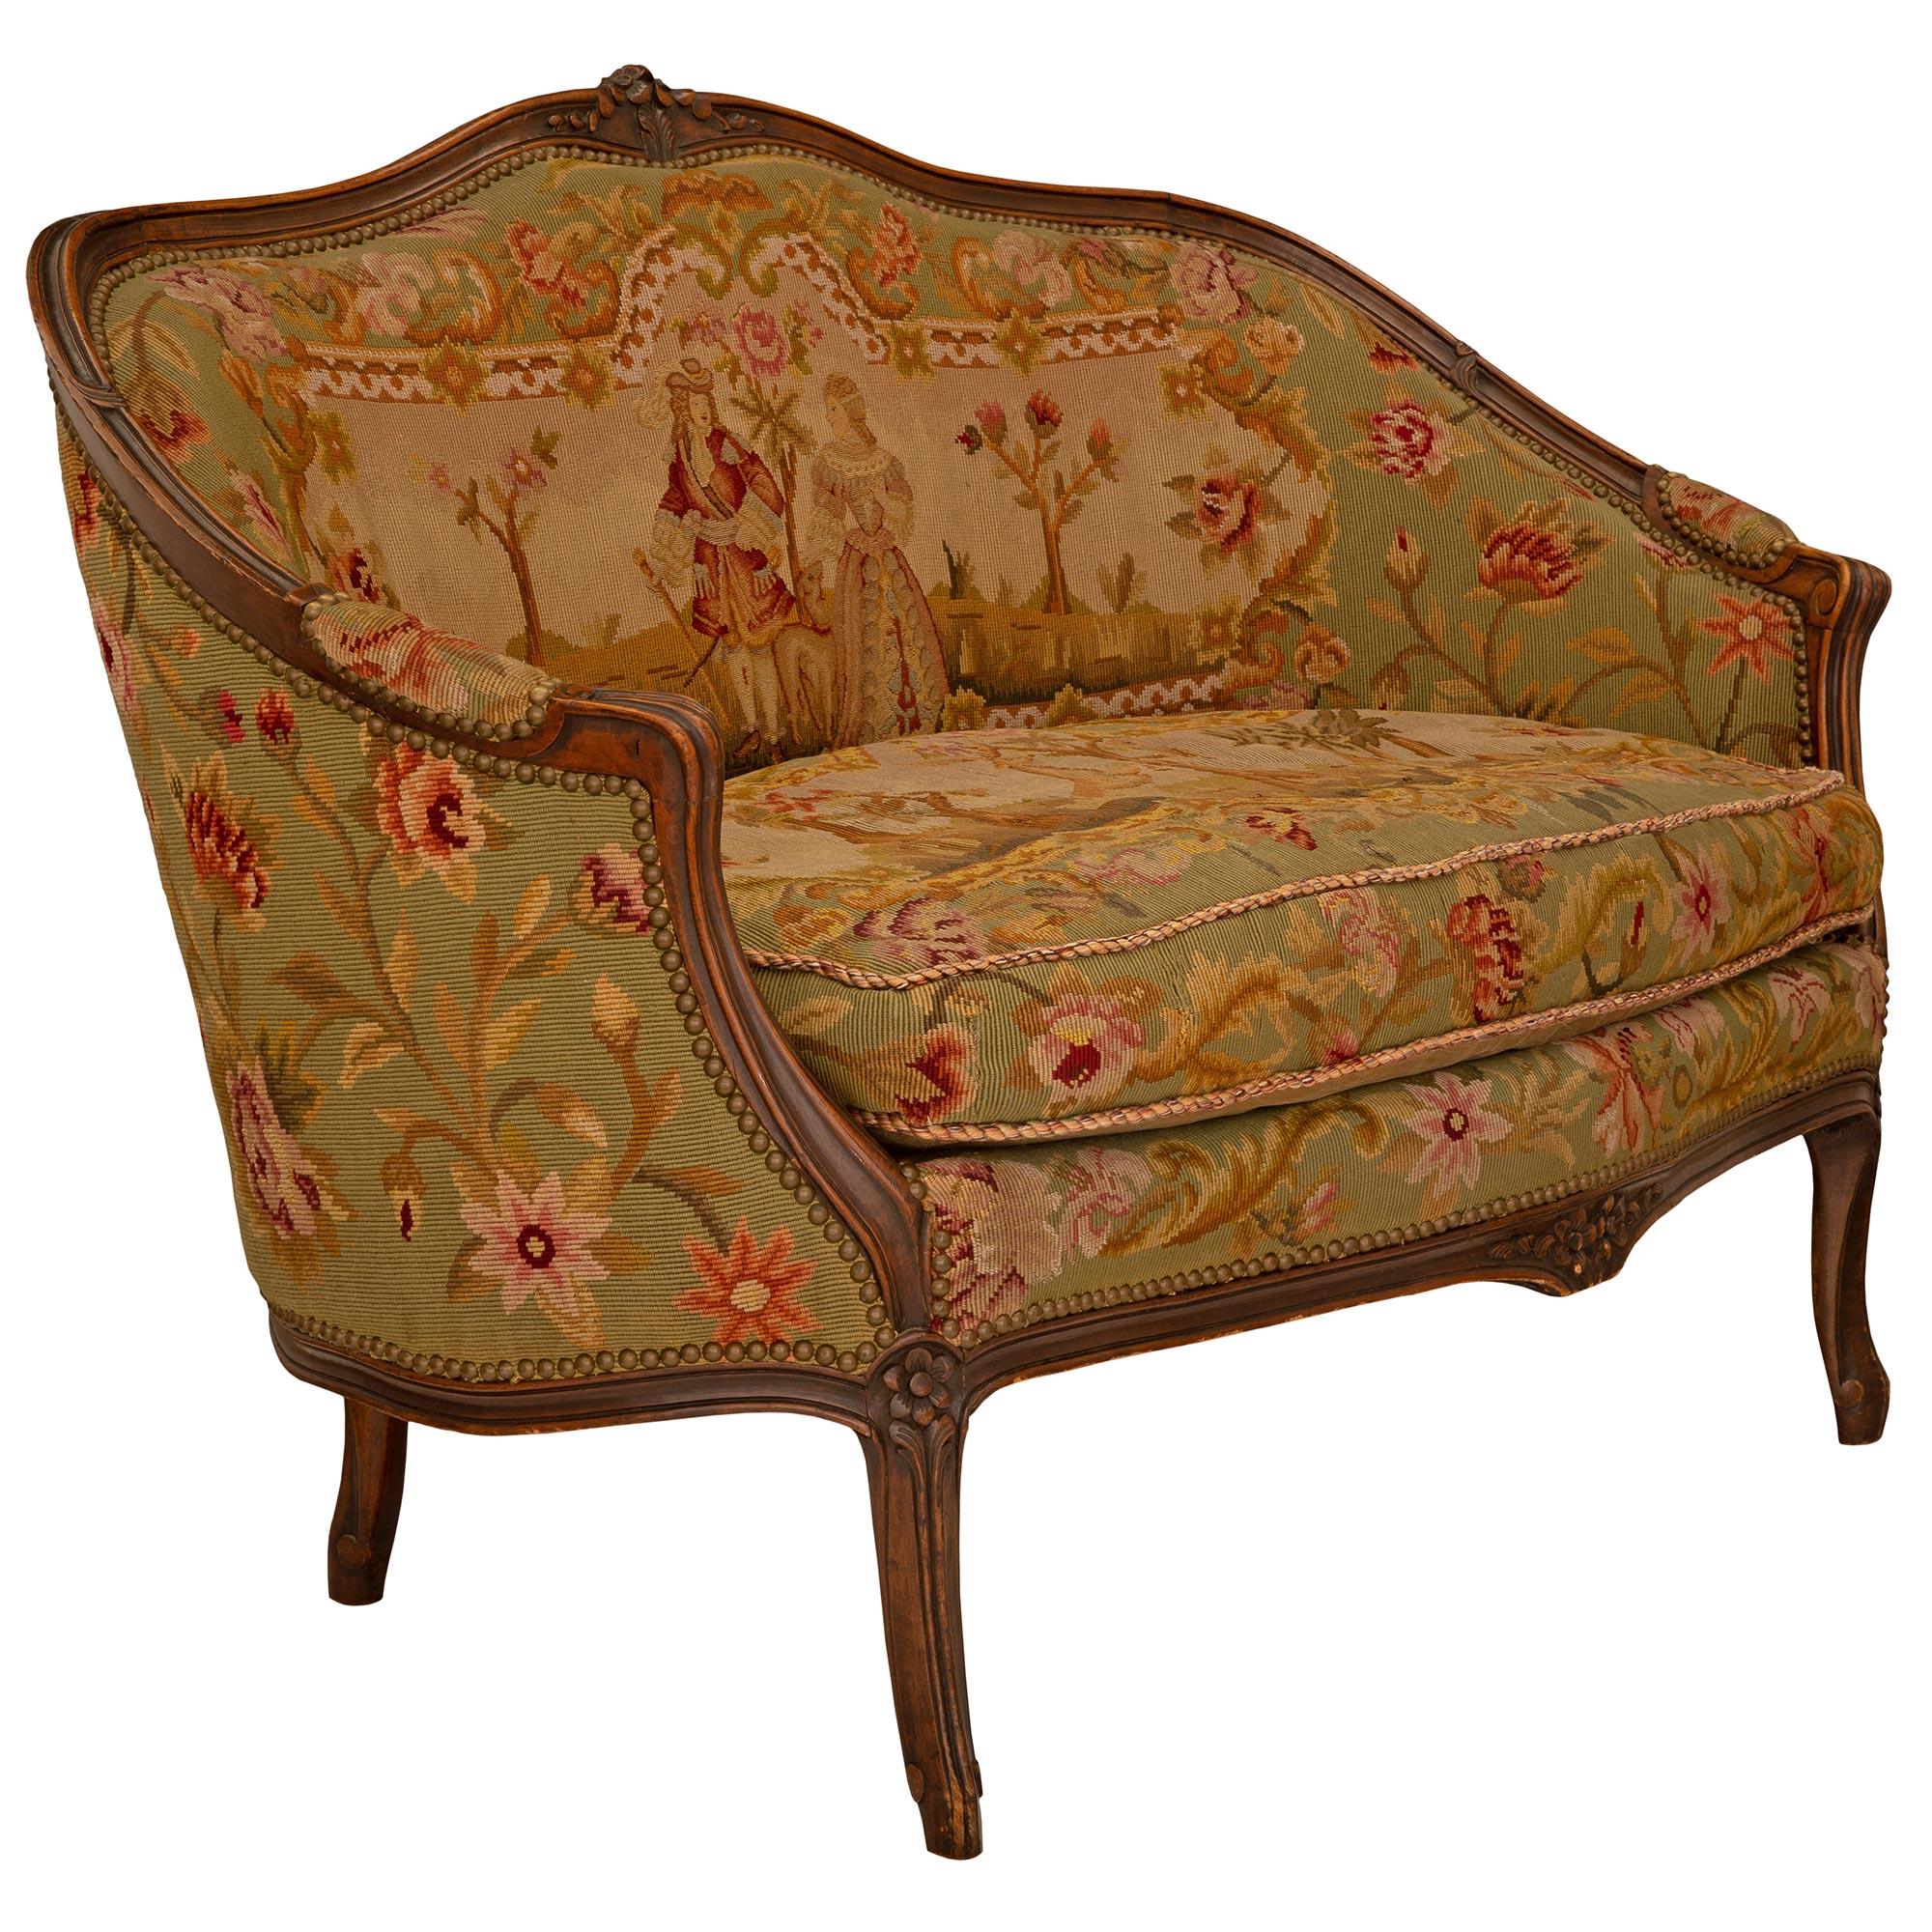 A charming French 19th century Louis XV st. Walnut and tapestry settee. The settee is raised by elegant cabriole legs with finely carved mottled fillets which extend along the frieze centered by richly carved flowers. The mottled fillets extend up